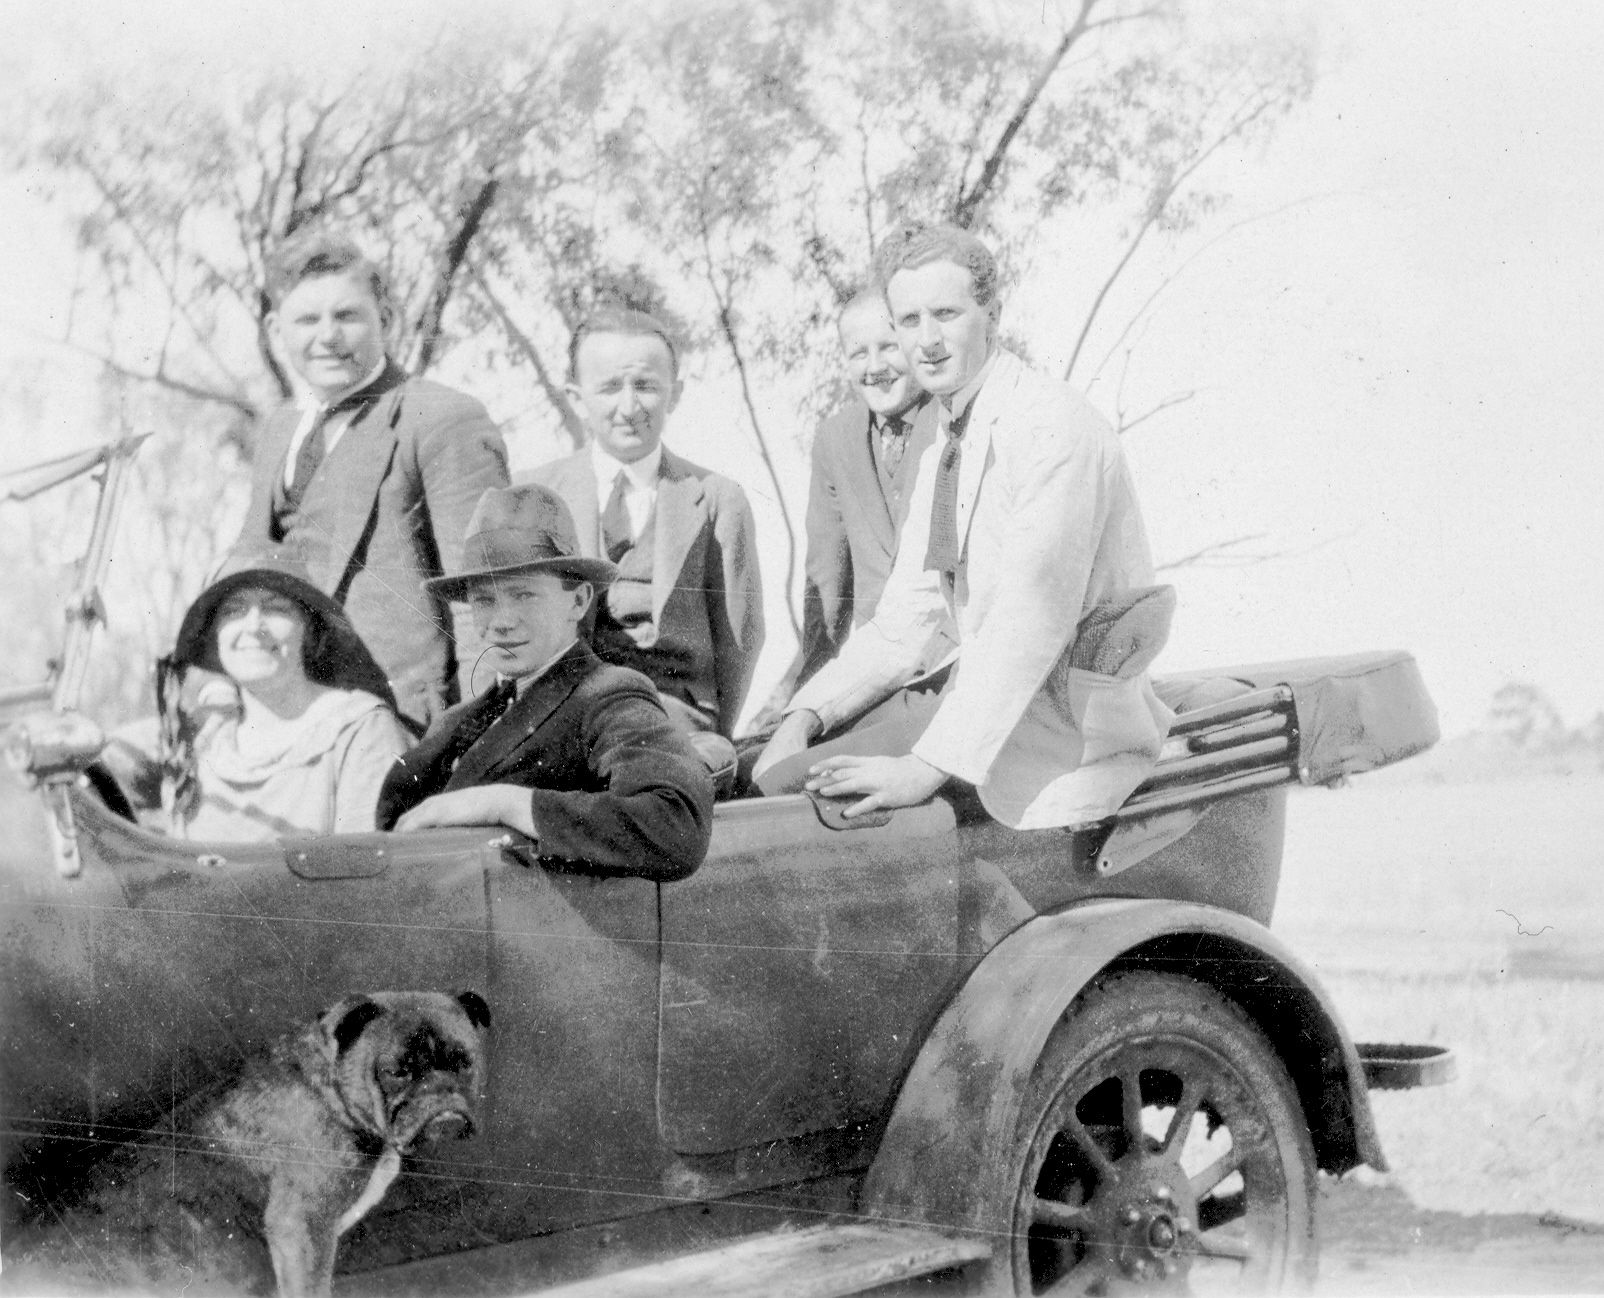 Travelling in a fiat with his wife Rena and staff in the early years - 1922. Photo: Jones Family Collection 